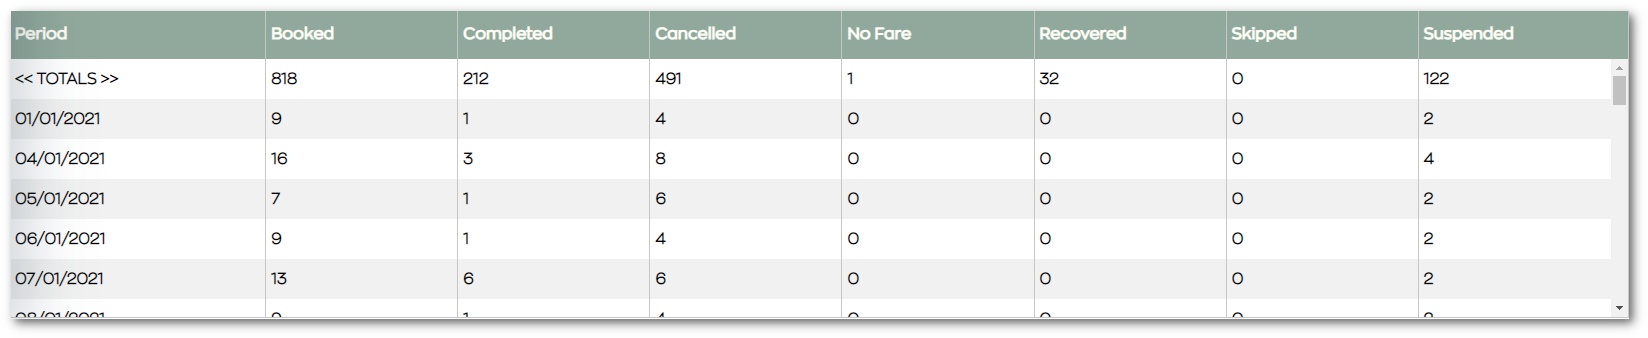 Booking_reports_table.png